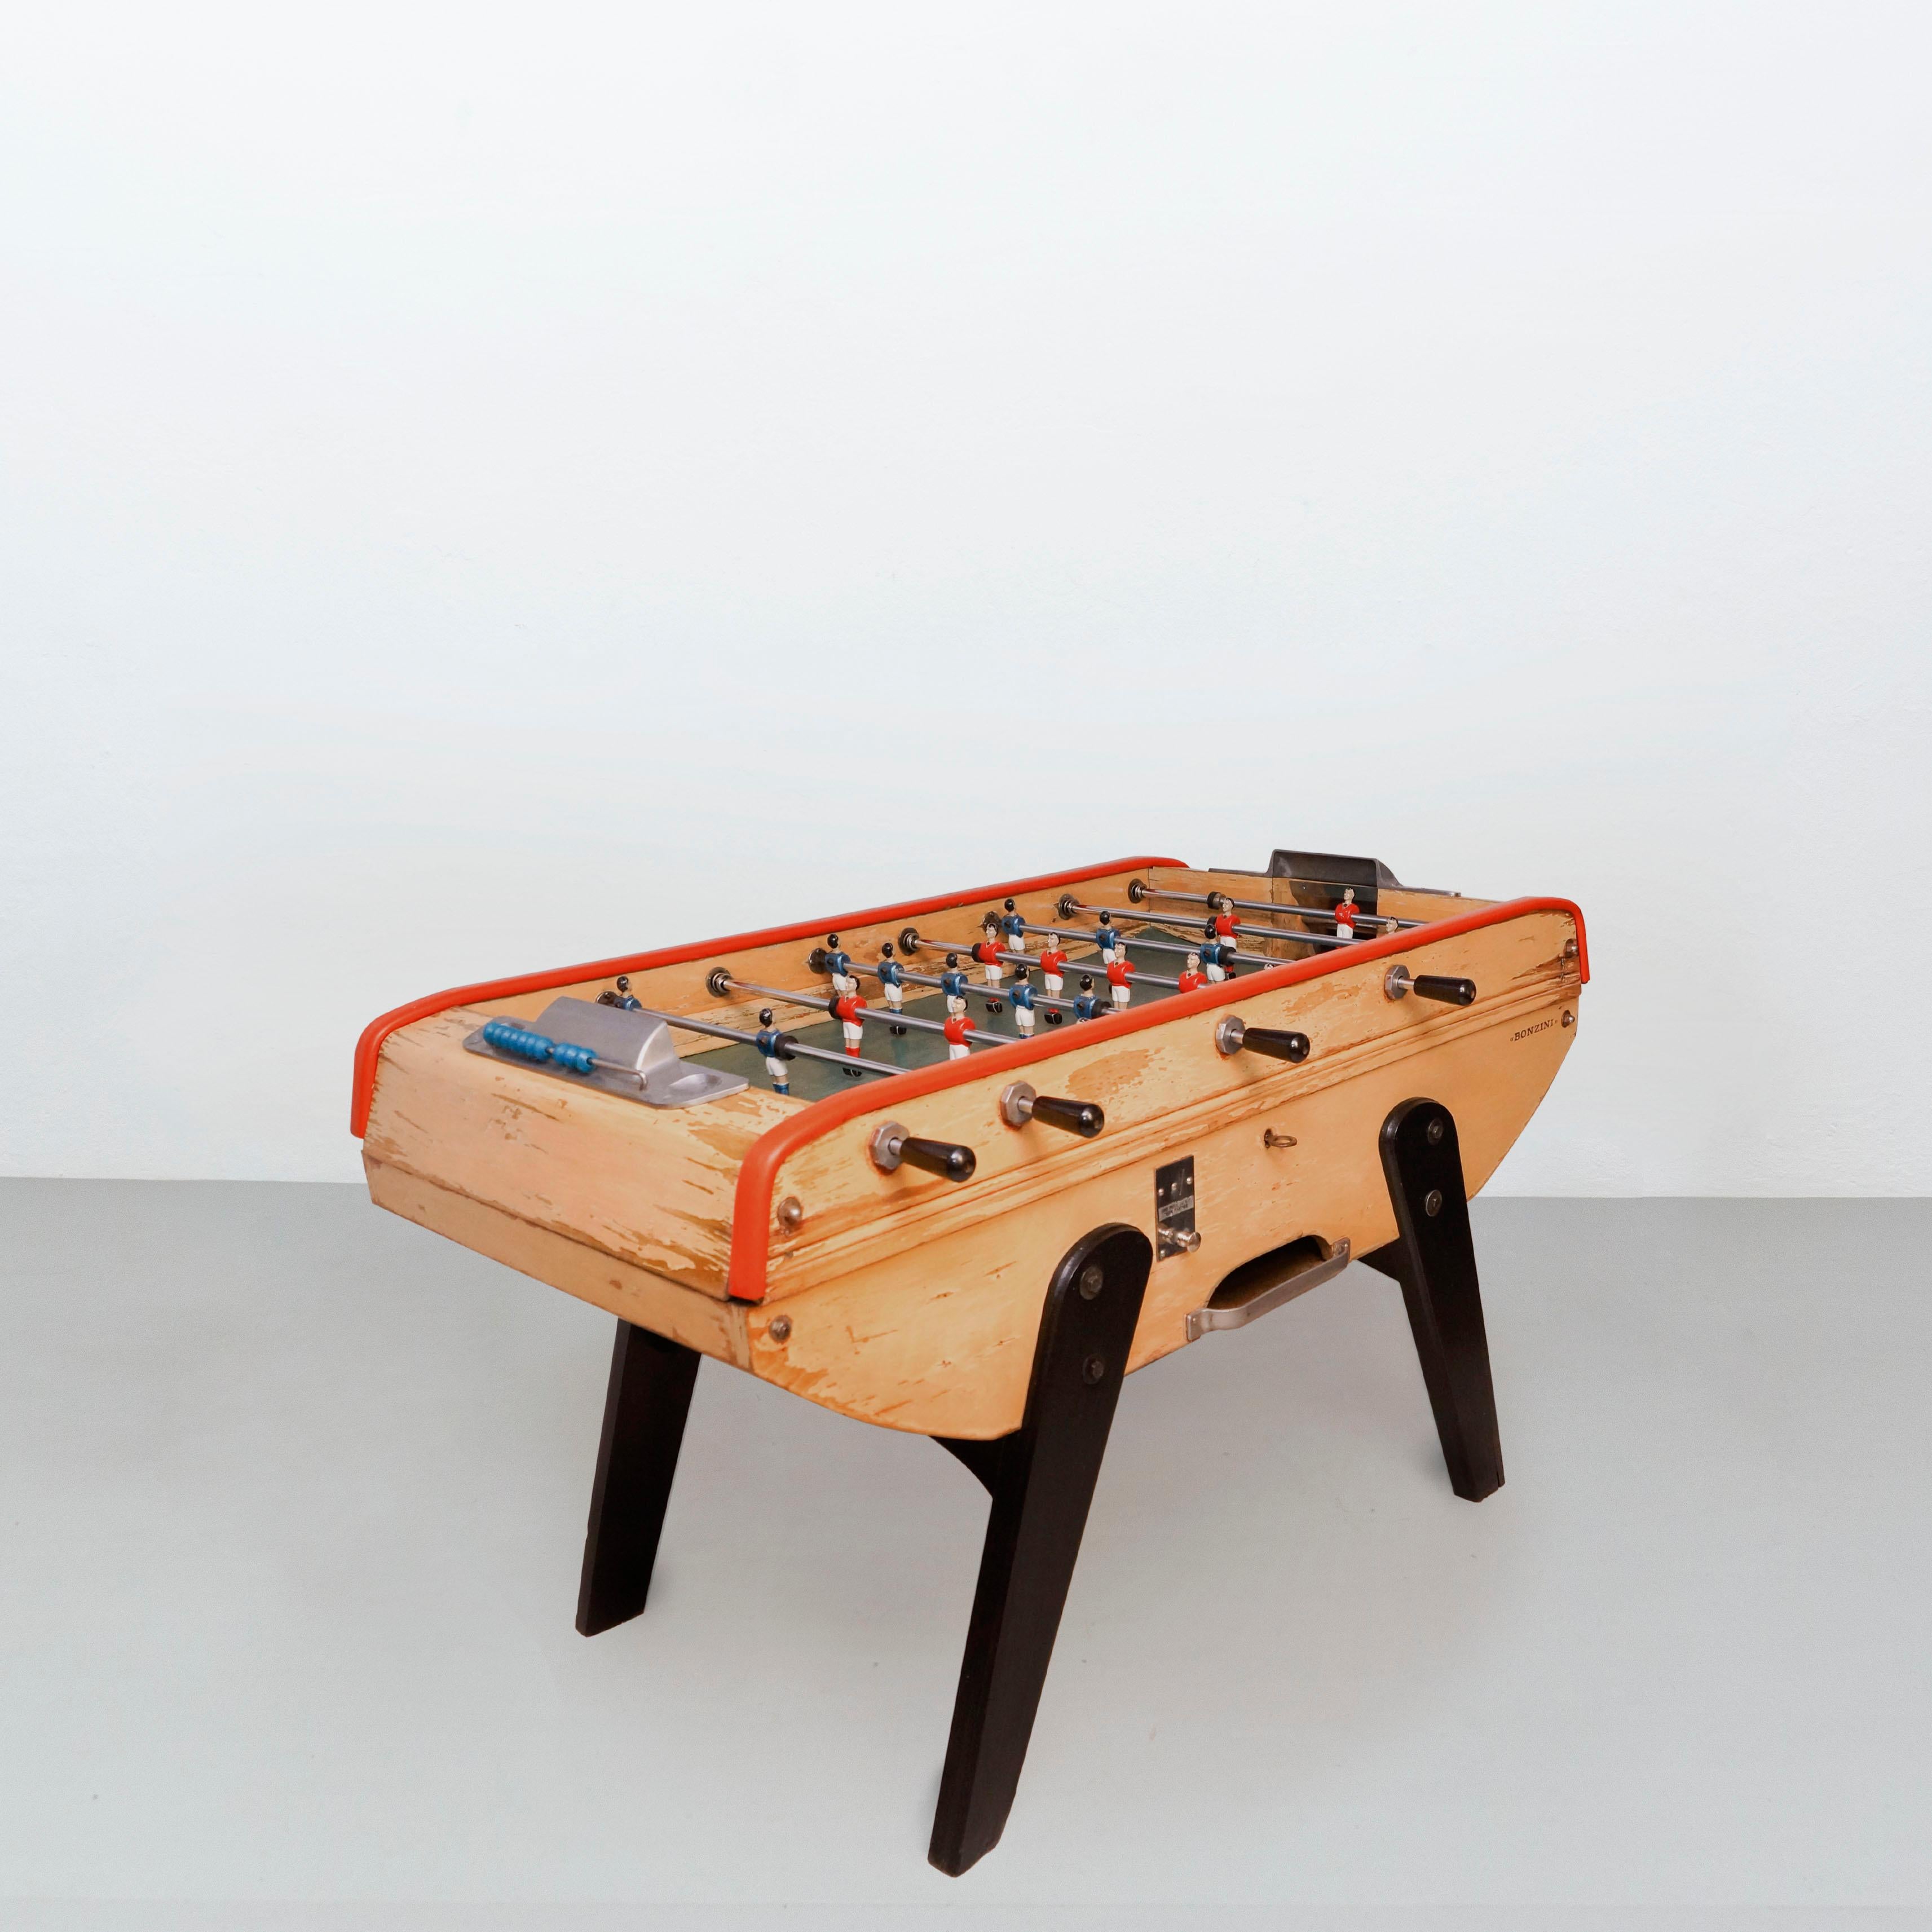 Table football by Bonzini from France, circa 1960.

In original condition, with minor wear consistent with age and use, preserving a beautiful patina.

Material:
Metal
Wood

Dimensions:
D 105 cm x W 150 cm x H 91 cm.